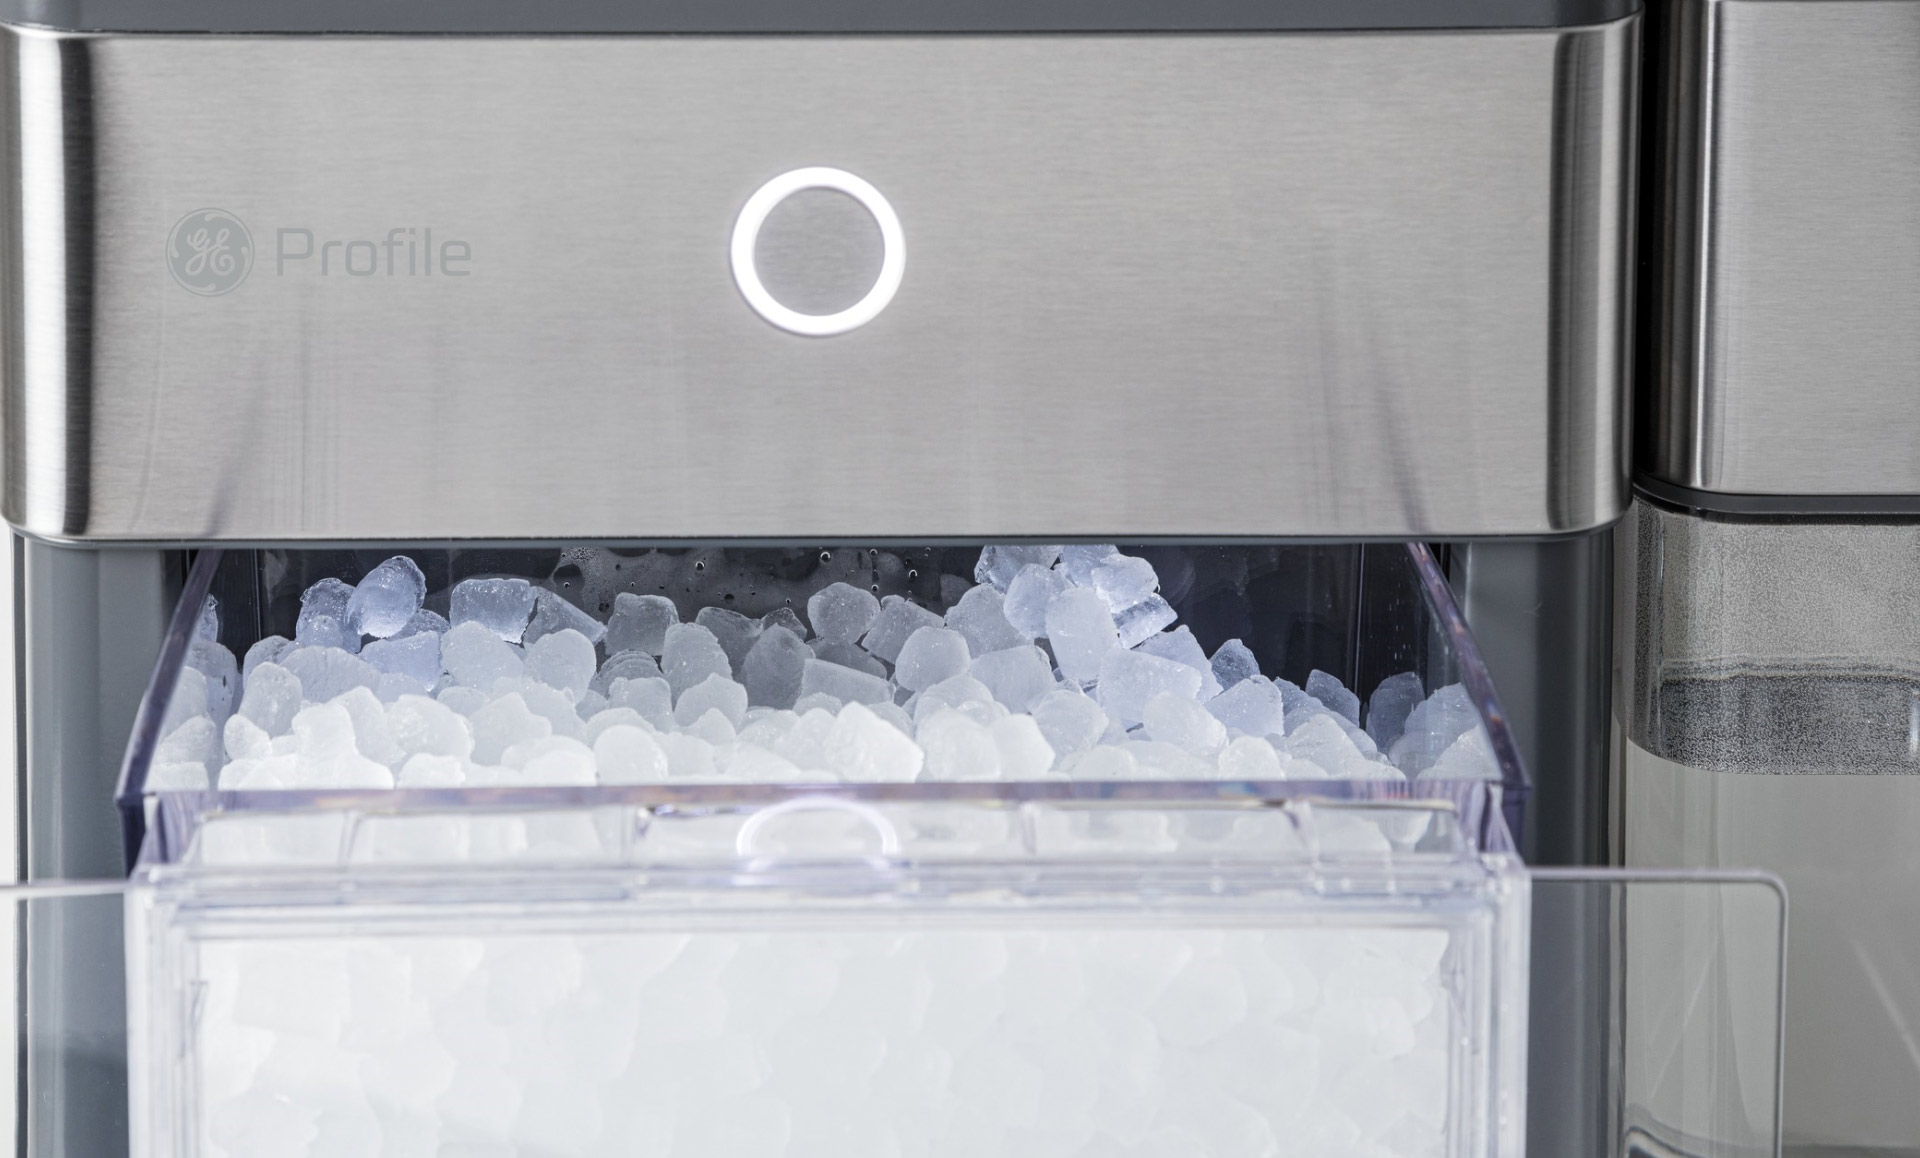 How To Make Your Ice Maker Work Faster